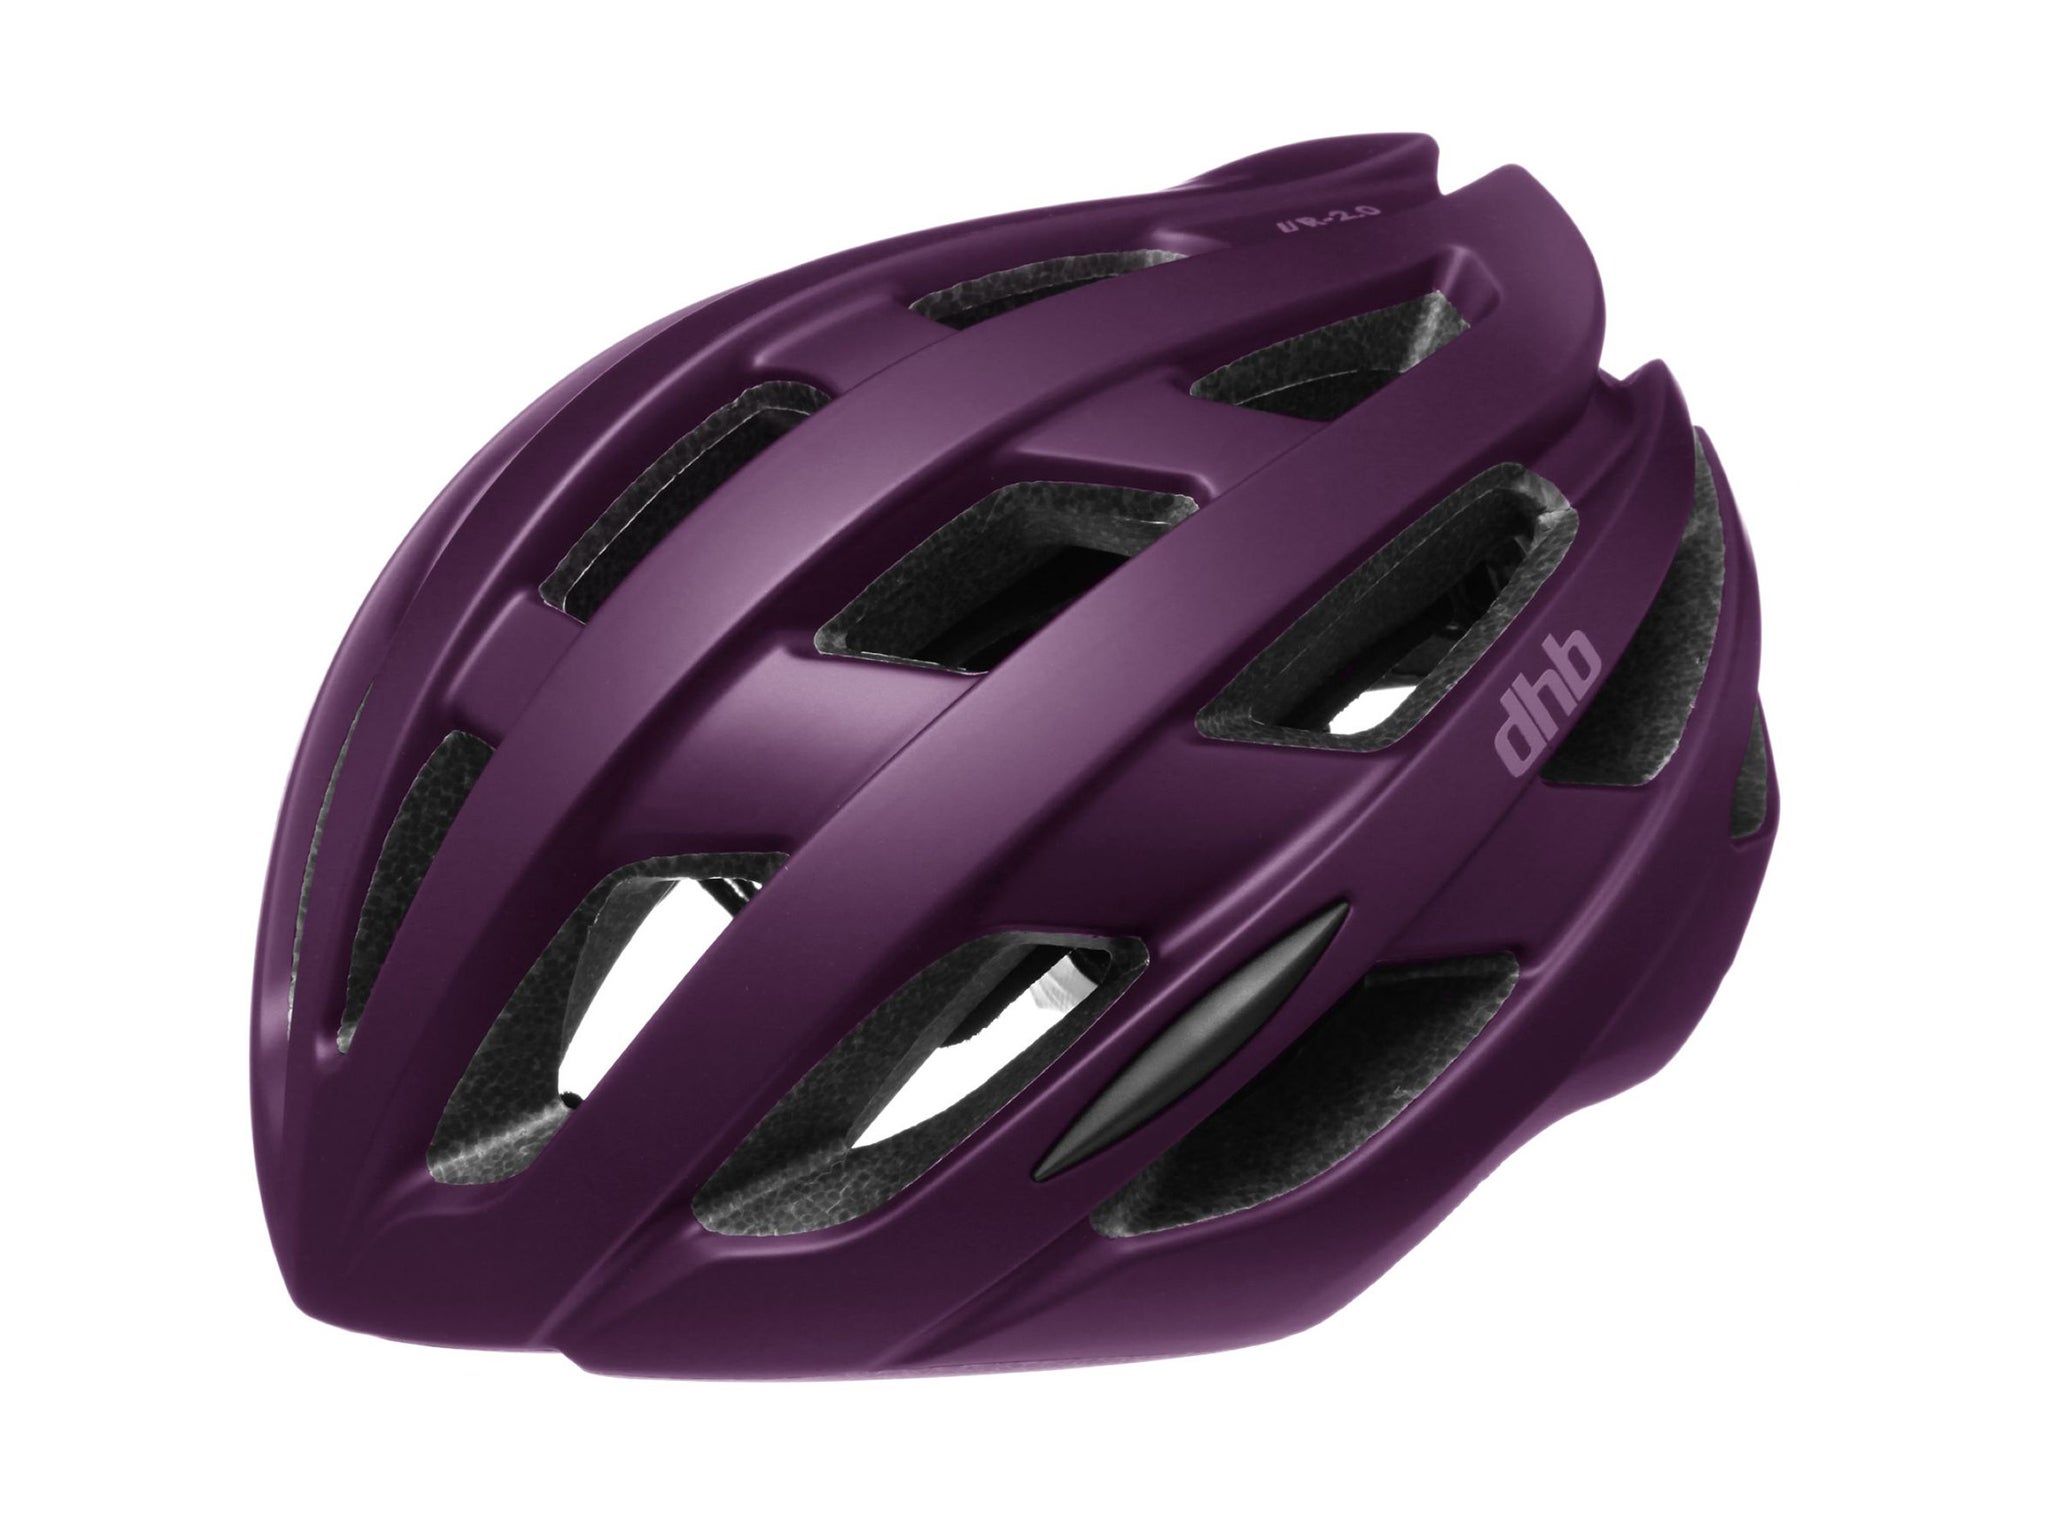 The dhb R2.0 road helmet offers real bang for your buck